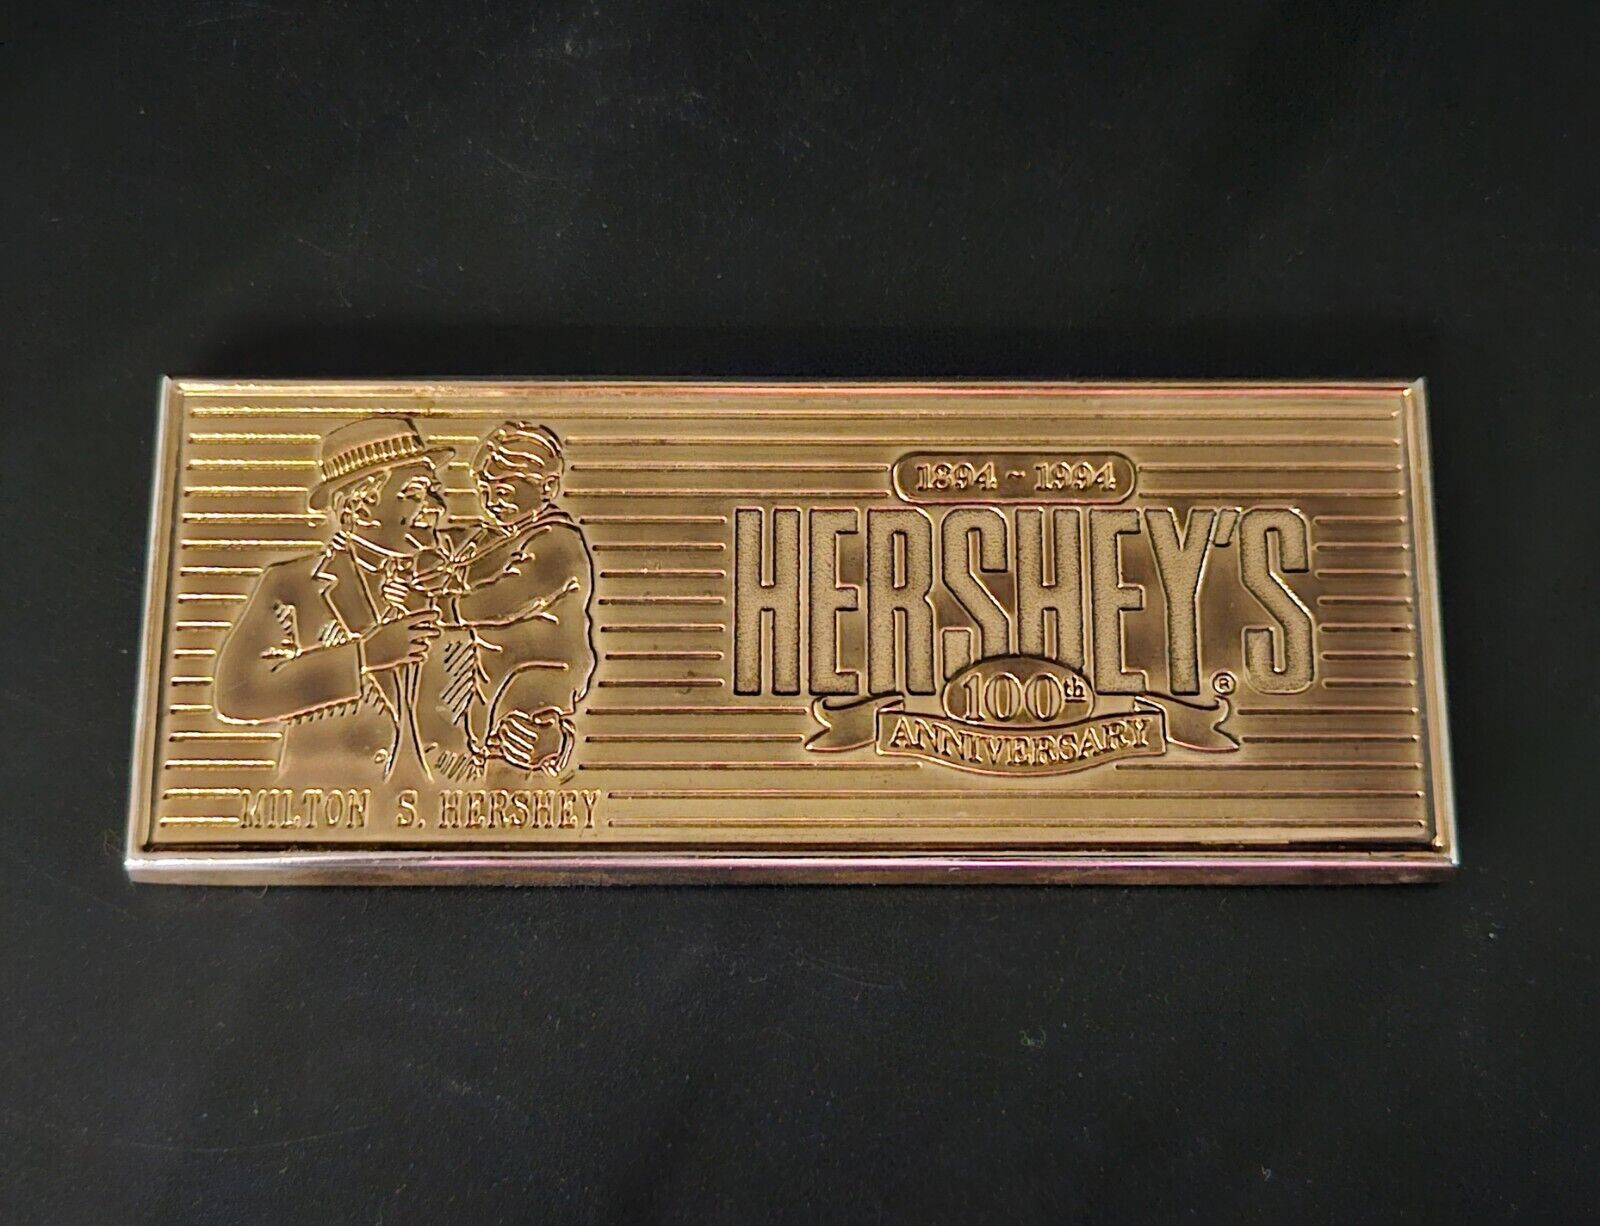 Hershey's 100th Anniversary 1894-1994 Gold Metal Candy Bar Paperweight